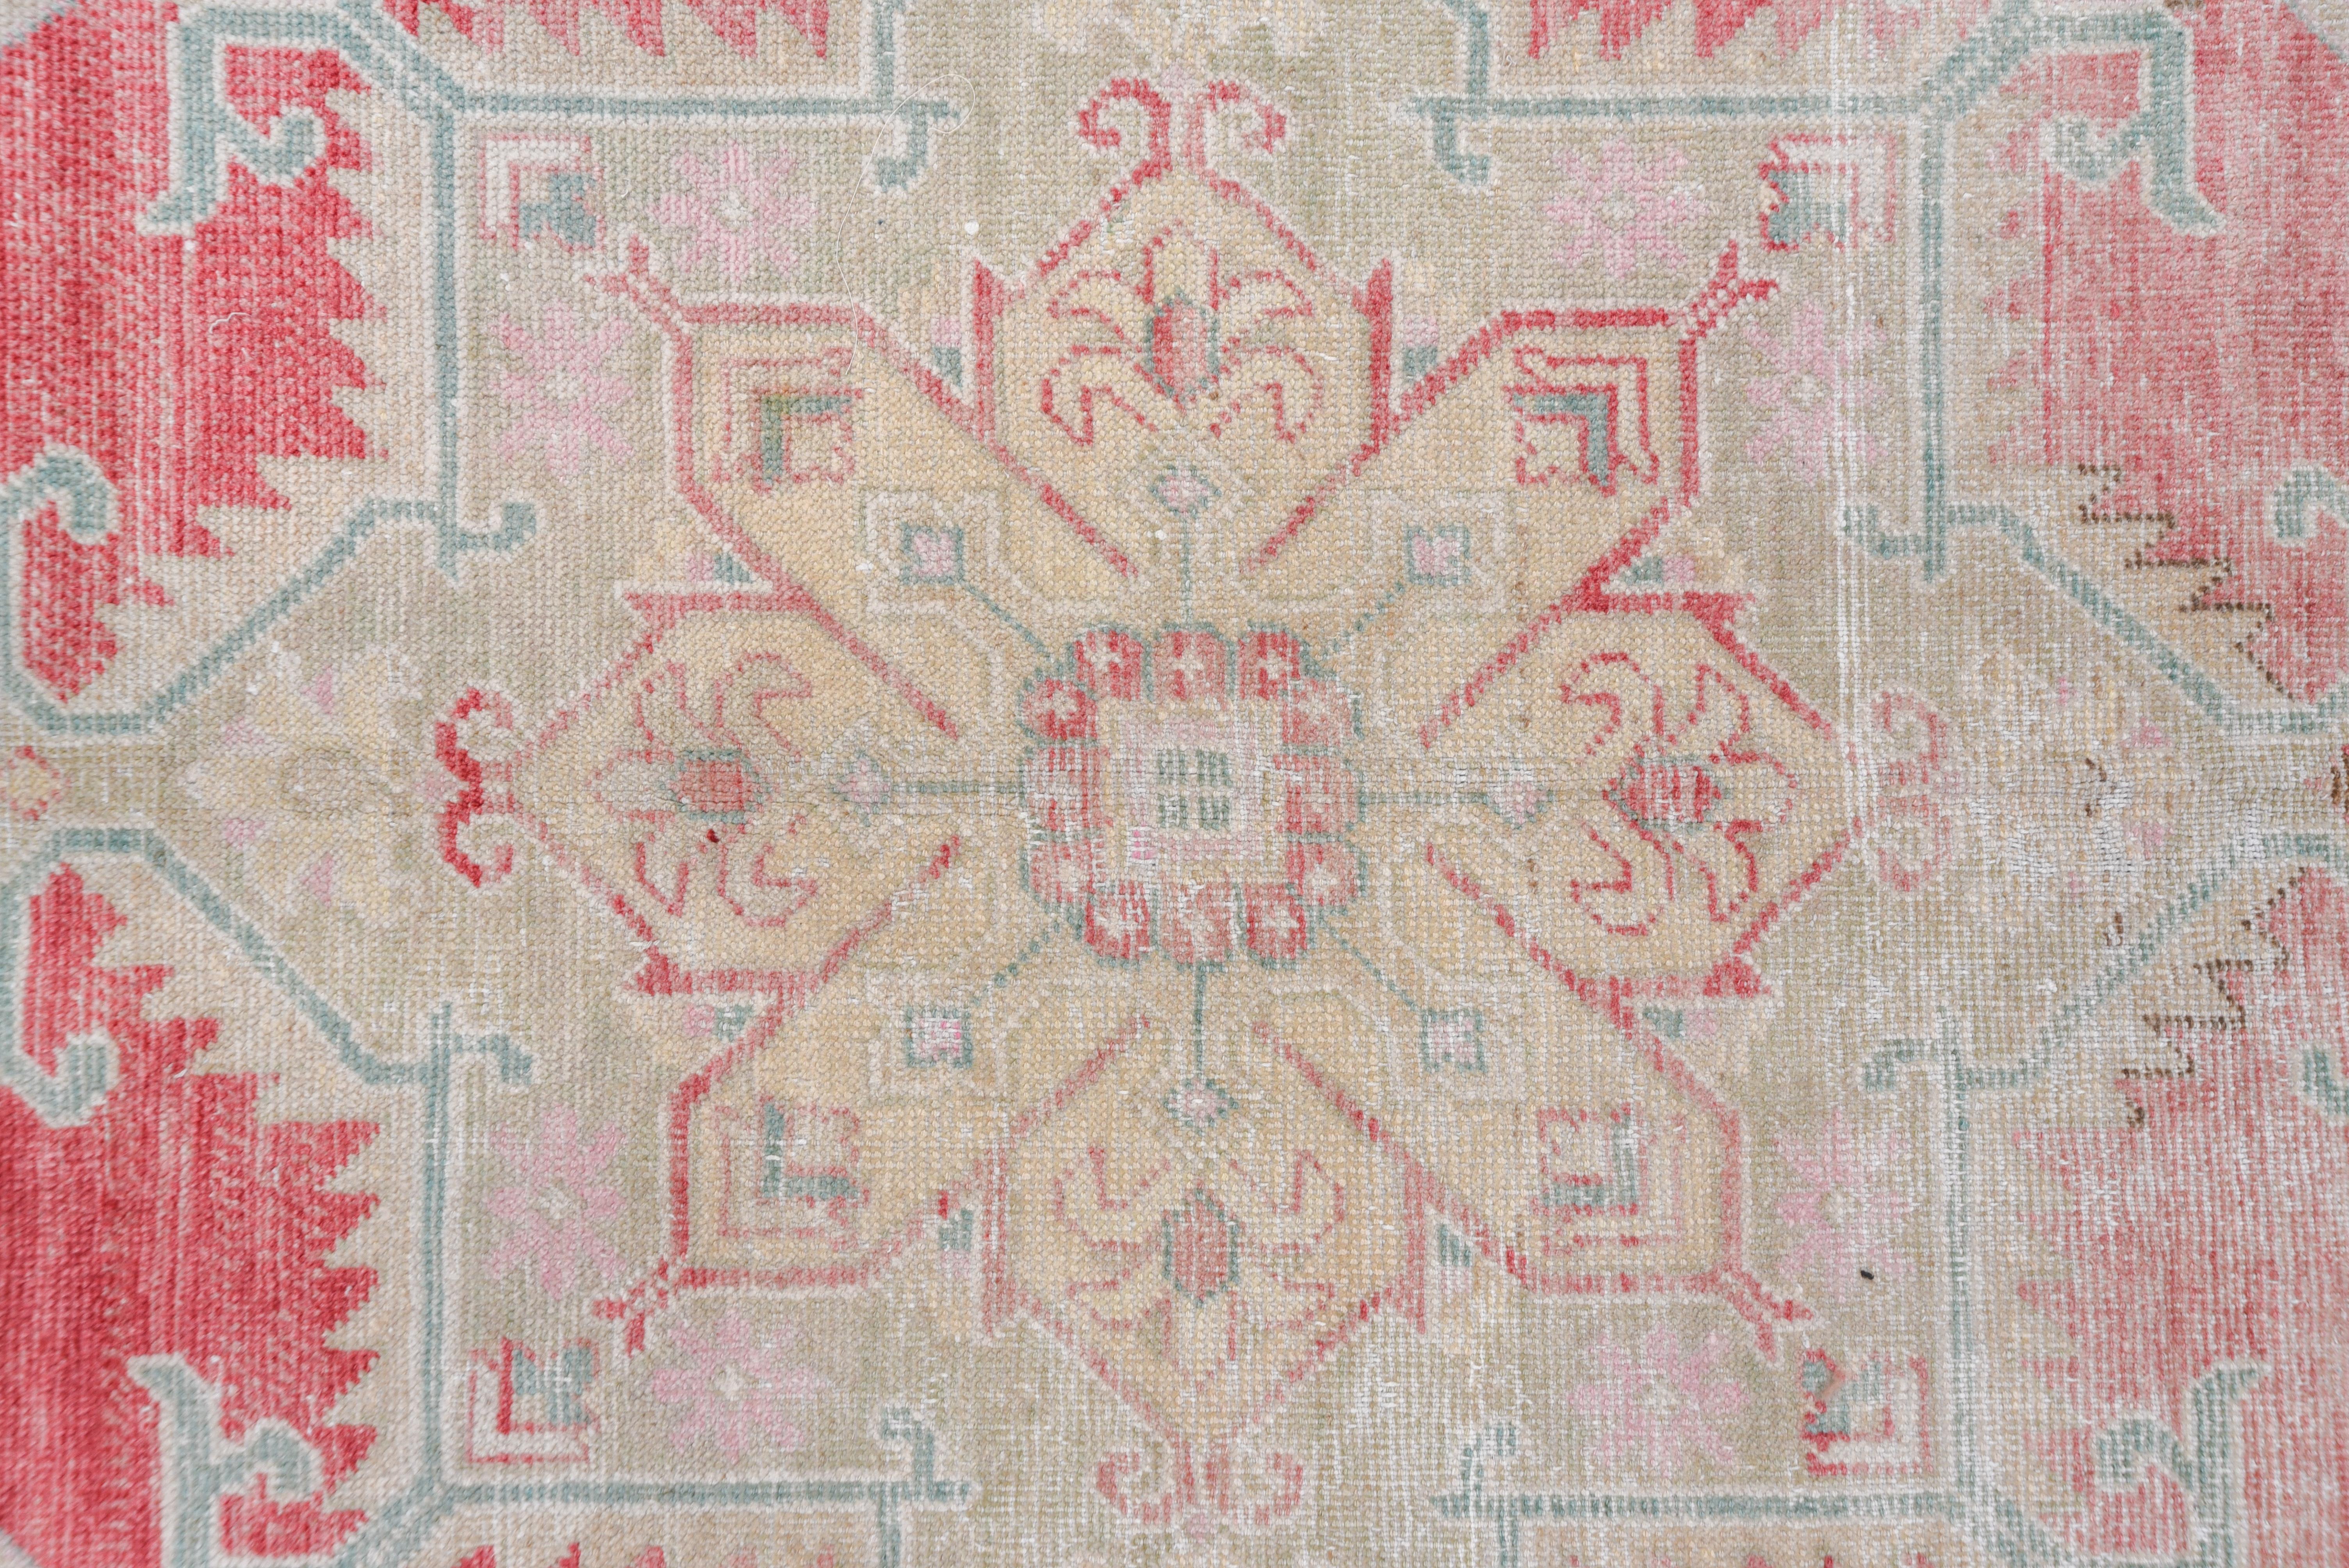 The red field of this oushak carpet strongly abrashes to pale rose wine while displaying a totally pendanted octogramme medallion within a palest green border of cypresses, rosettes and roughly serrated leaves. Straw outer minor band.